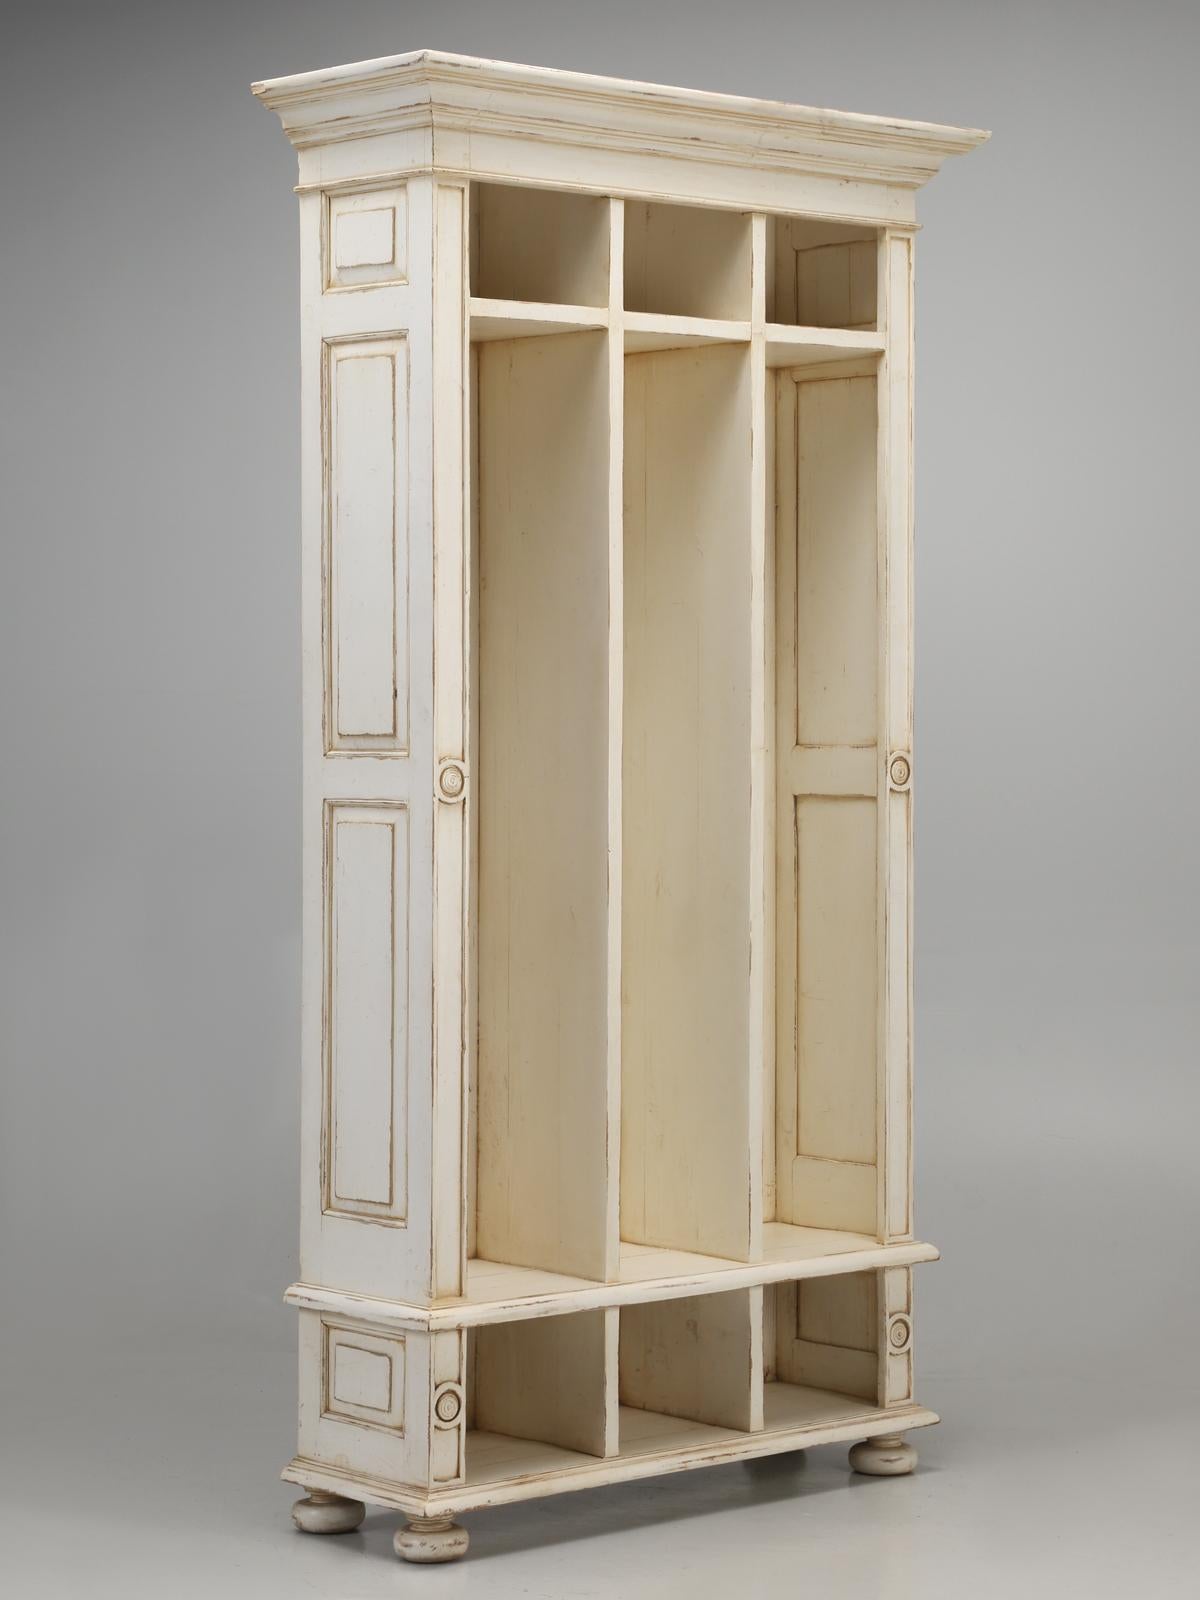 Back hall coat, hat and shoe cabinet. The ideal back hall cubby-hole cabinet, for the family’s coats, hats and shoes. This is an older reproduction, made by an off-shore company, with a nice distressed cream-colored paint.